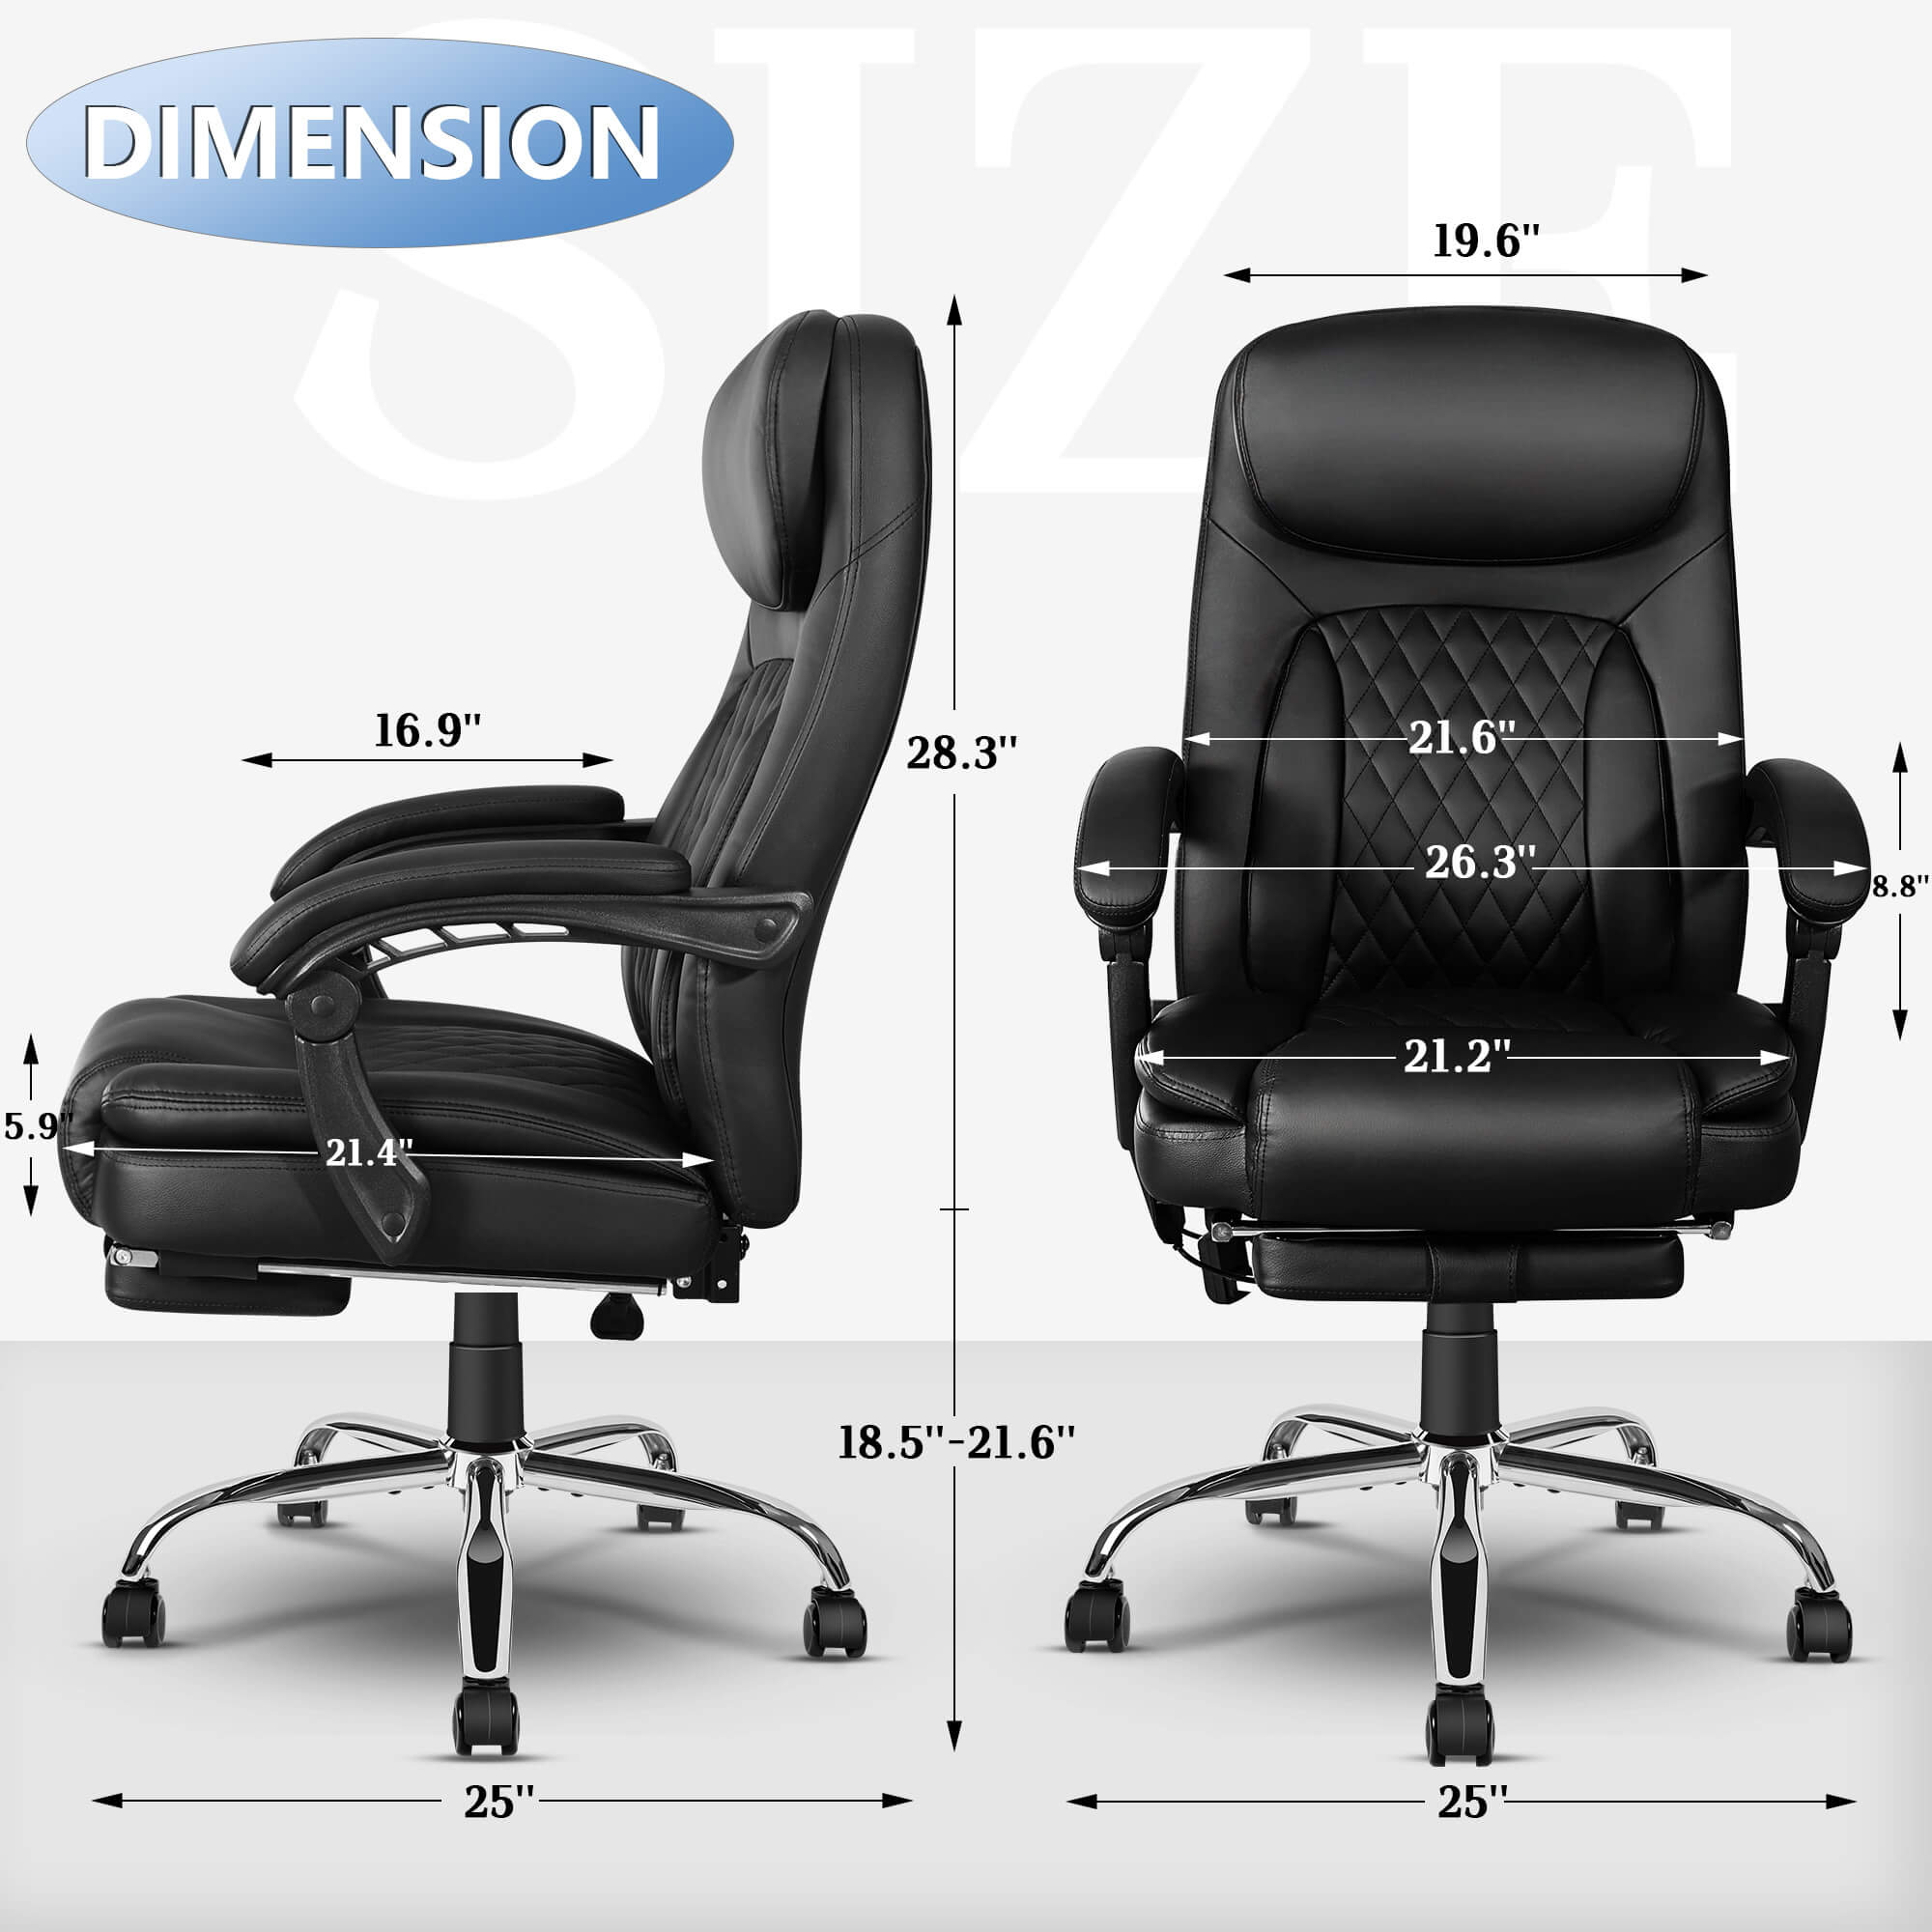 6-Point Massage Office Chair with Heating, Reclining Backrest, Footrest, Black